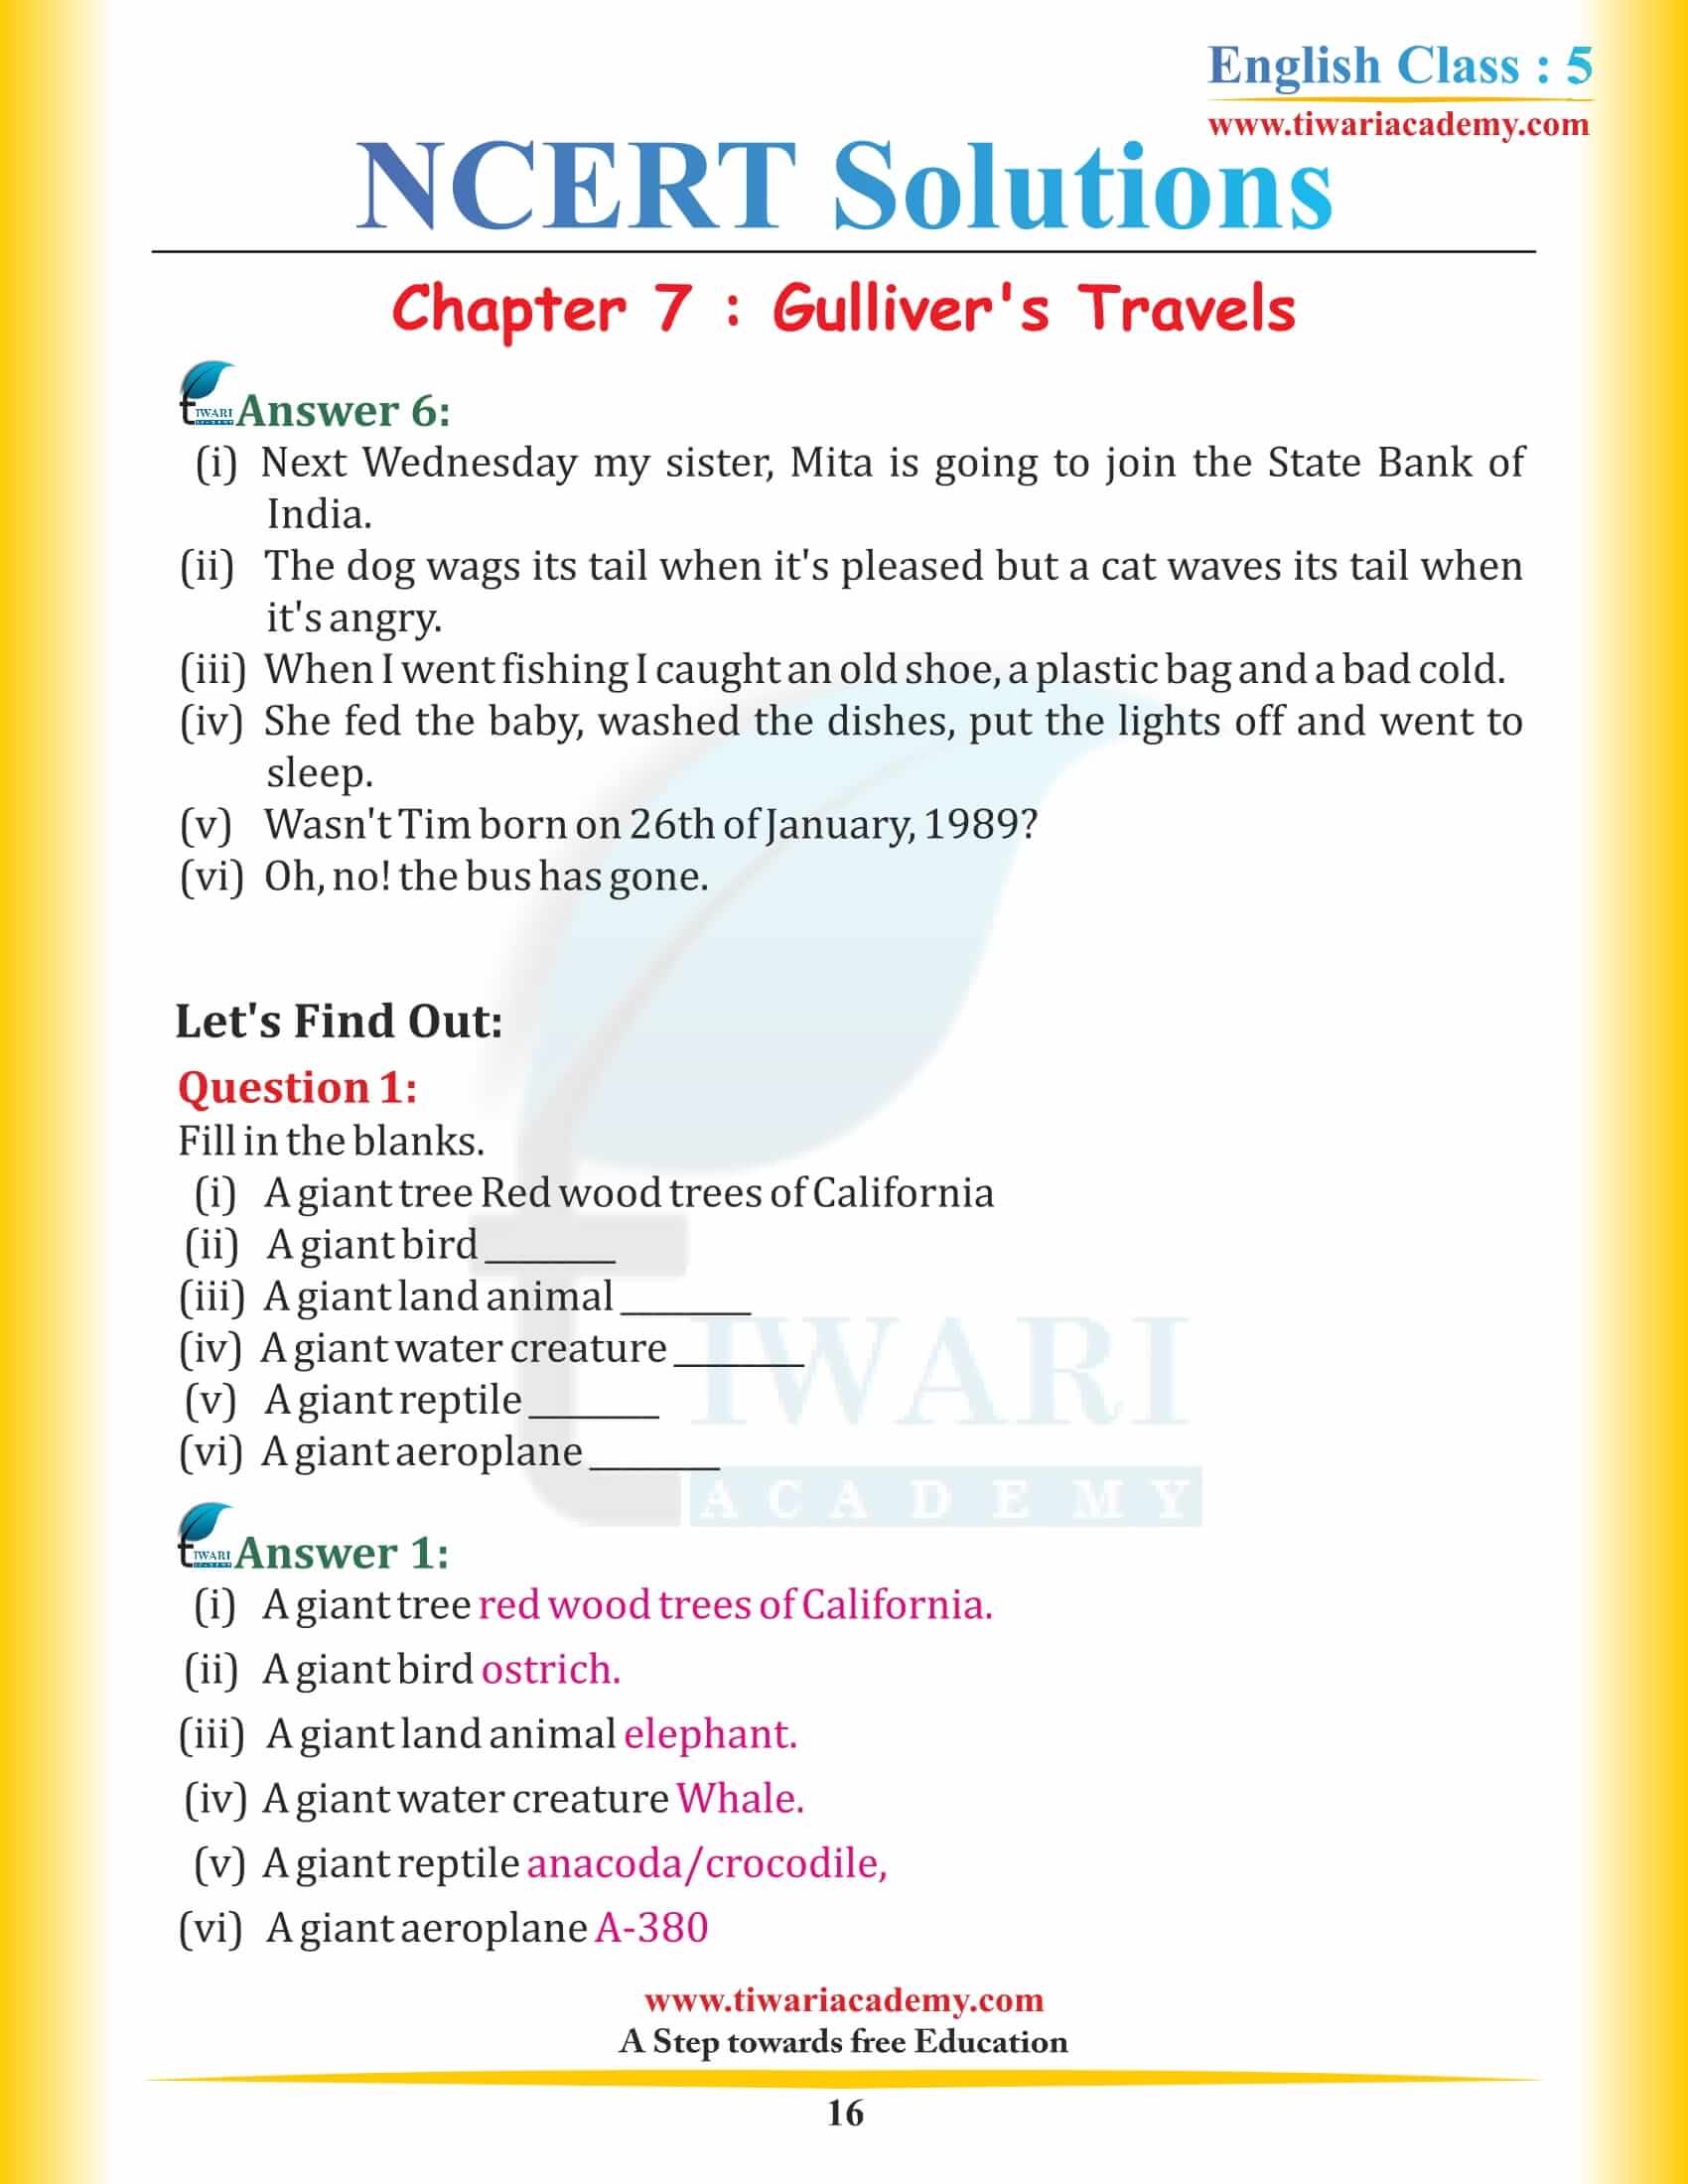 NCERT Solutions for Class 5 English Chapter 7 in PDF free